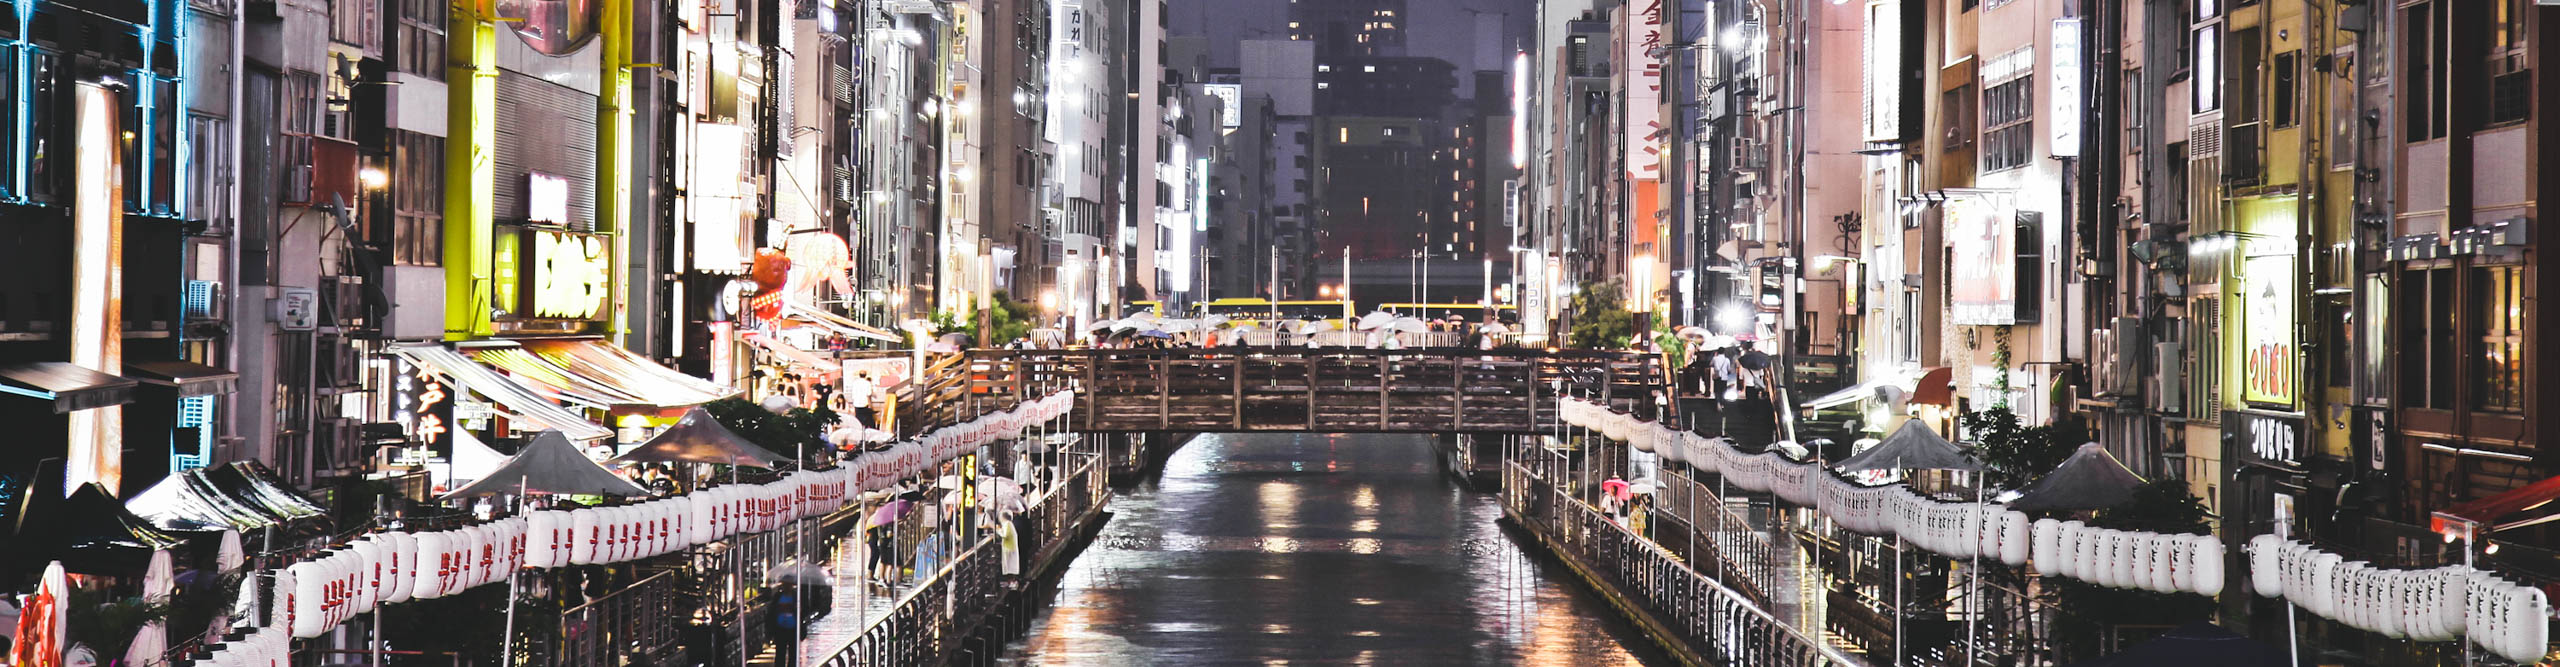 Neon lights of Osaka over the river at night, Japan